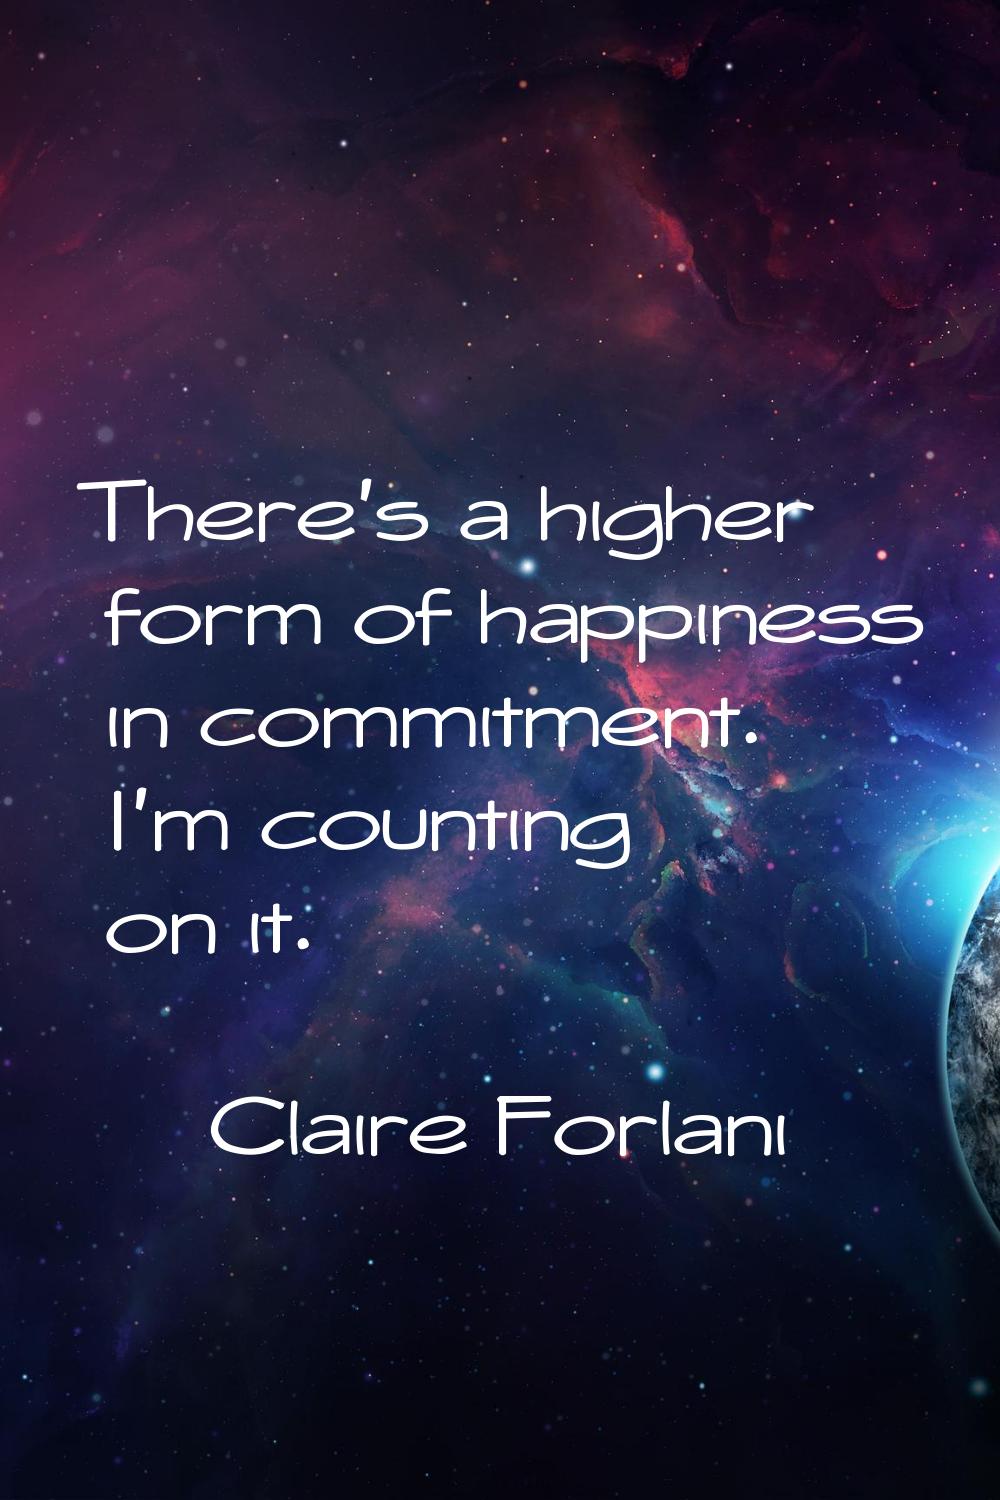 There's a higher form of happiness in commitment. I'm counting on it.